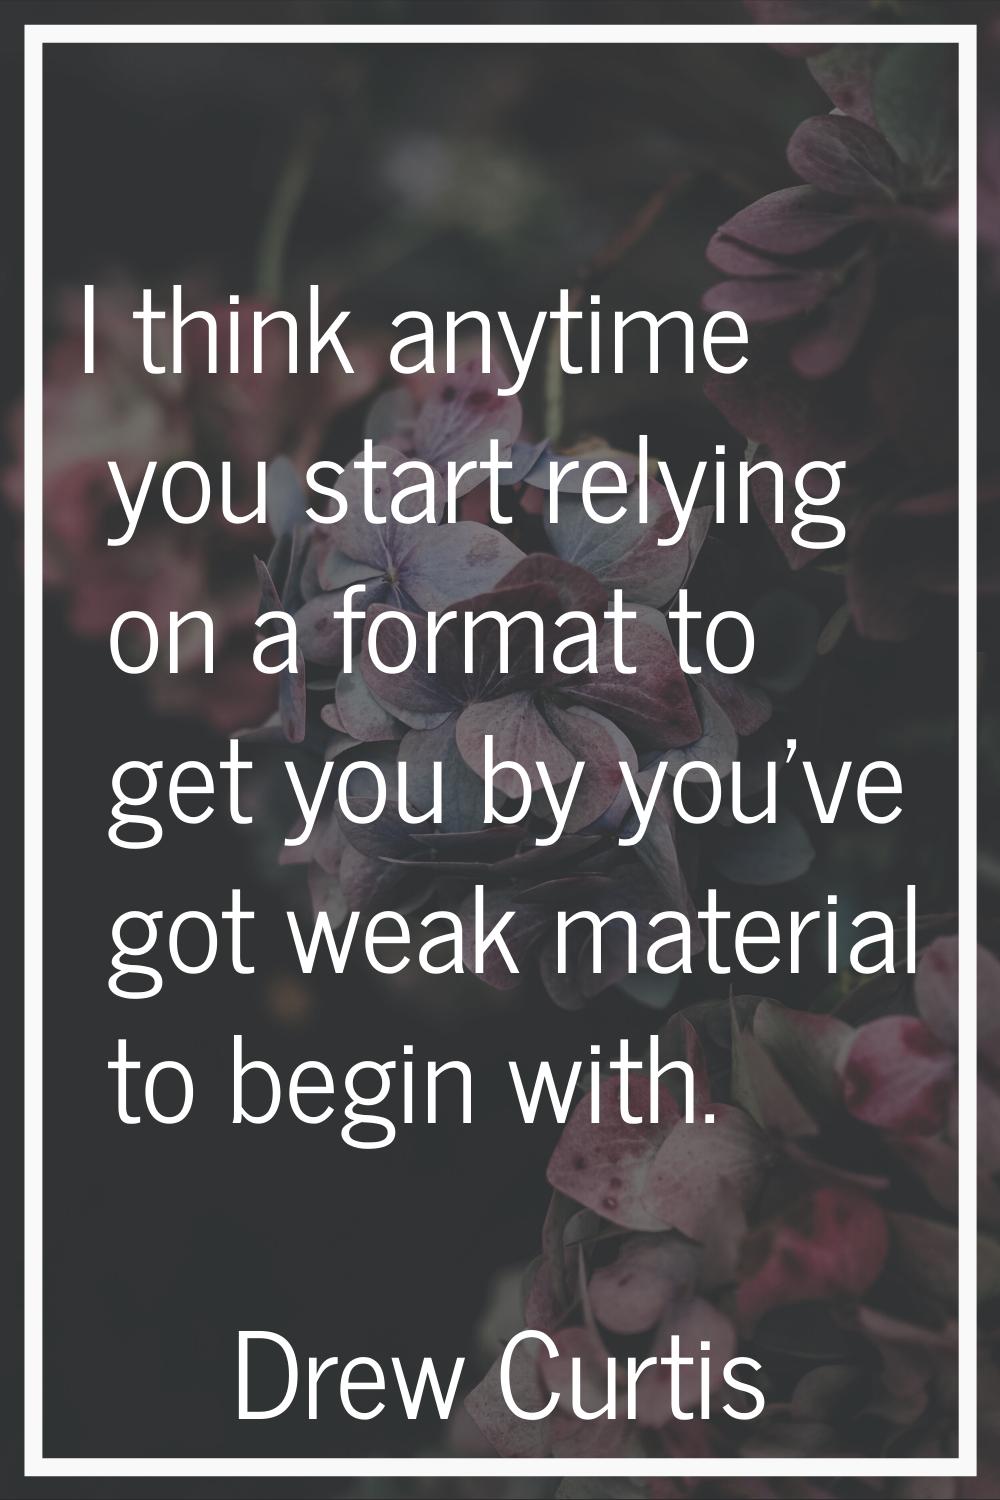 I think anytime you start relying on a format to get you by you've got weak material to begin with.